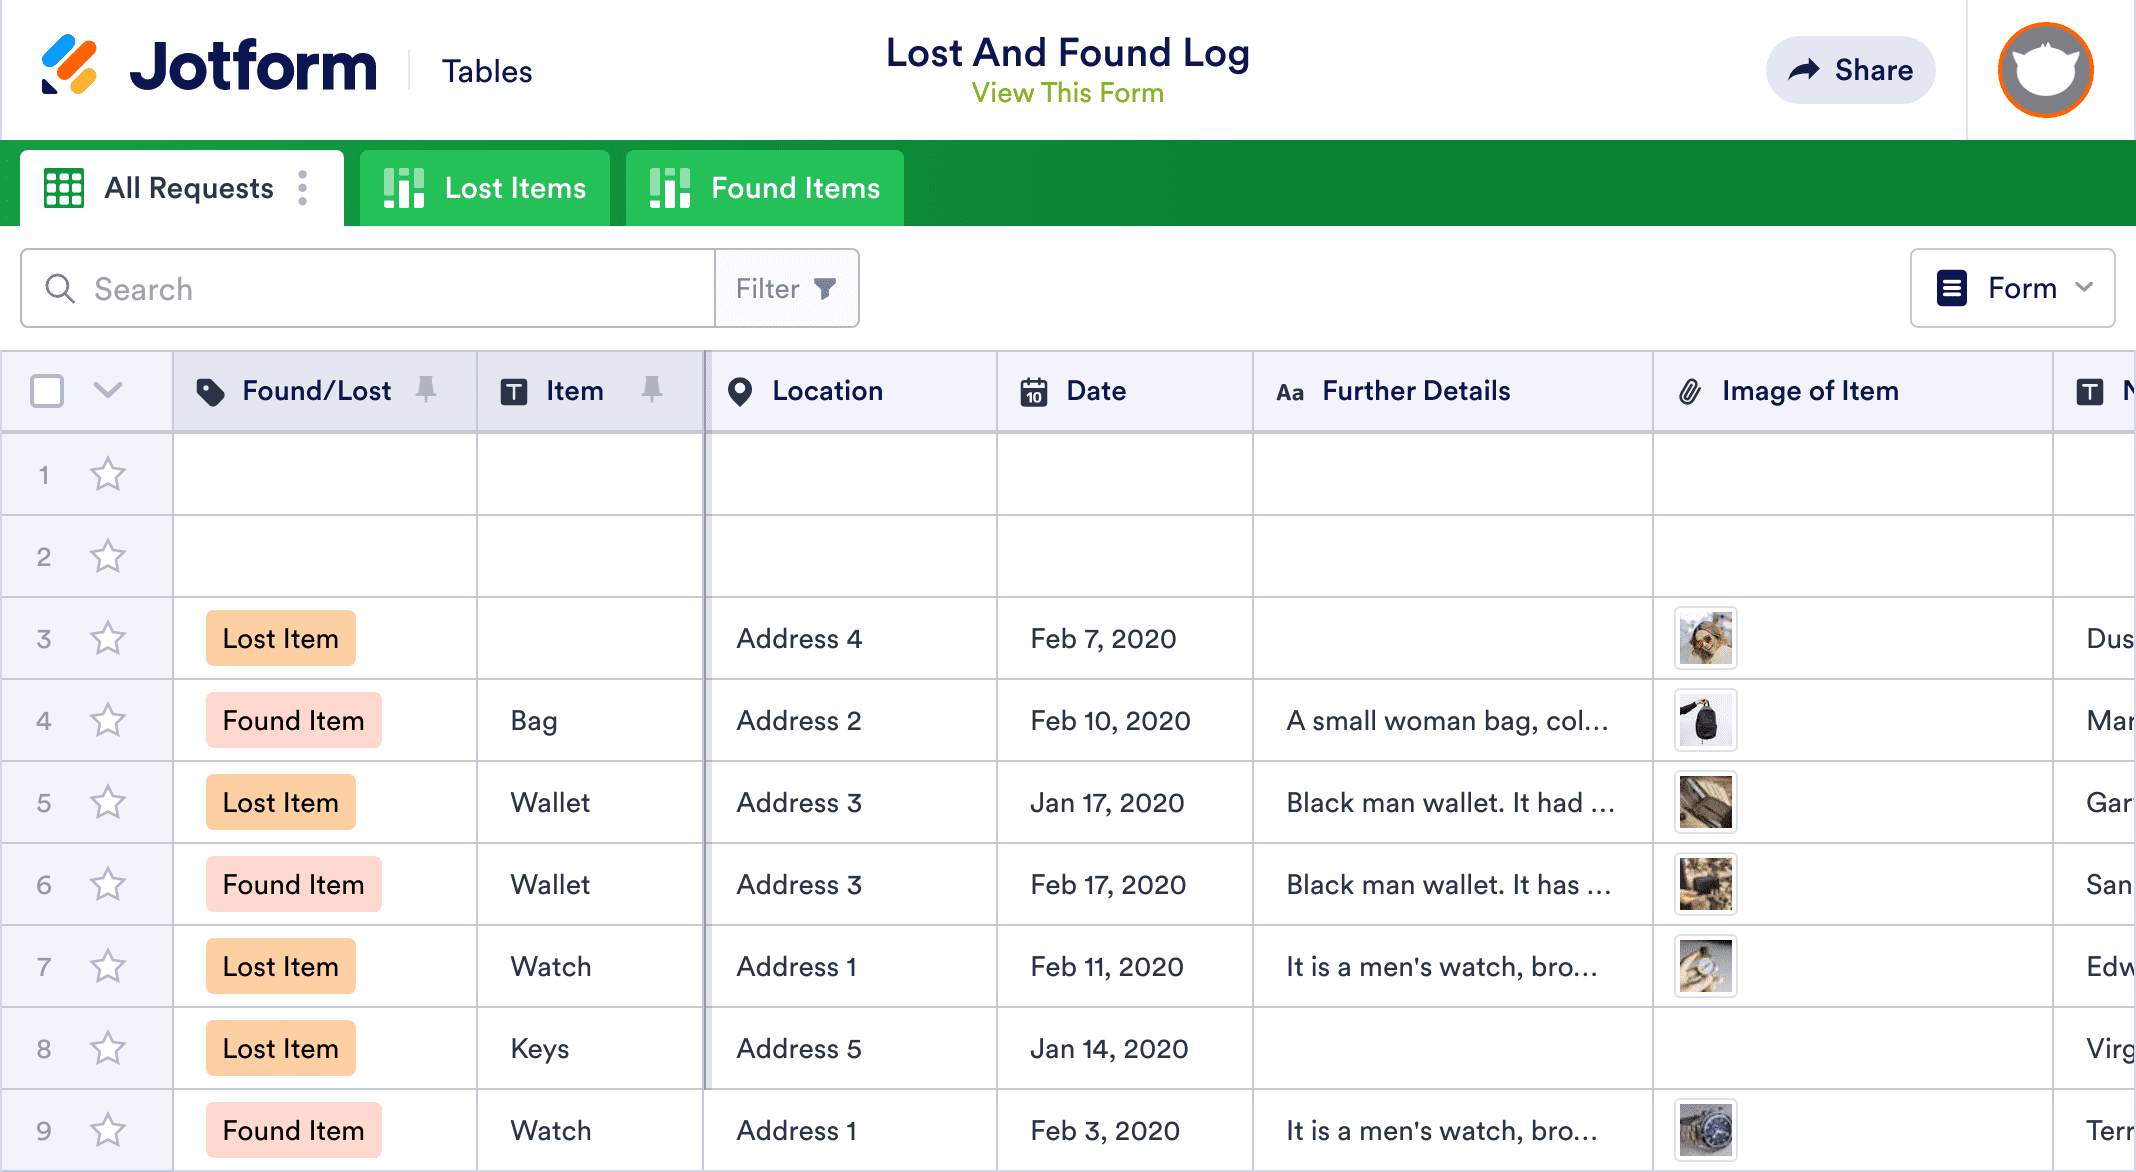 Lost And Found Log Template | Jotform Tables